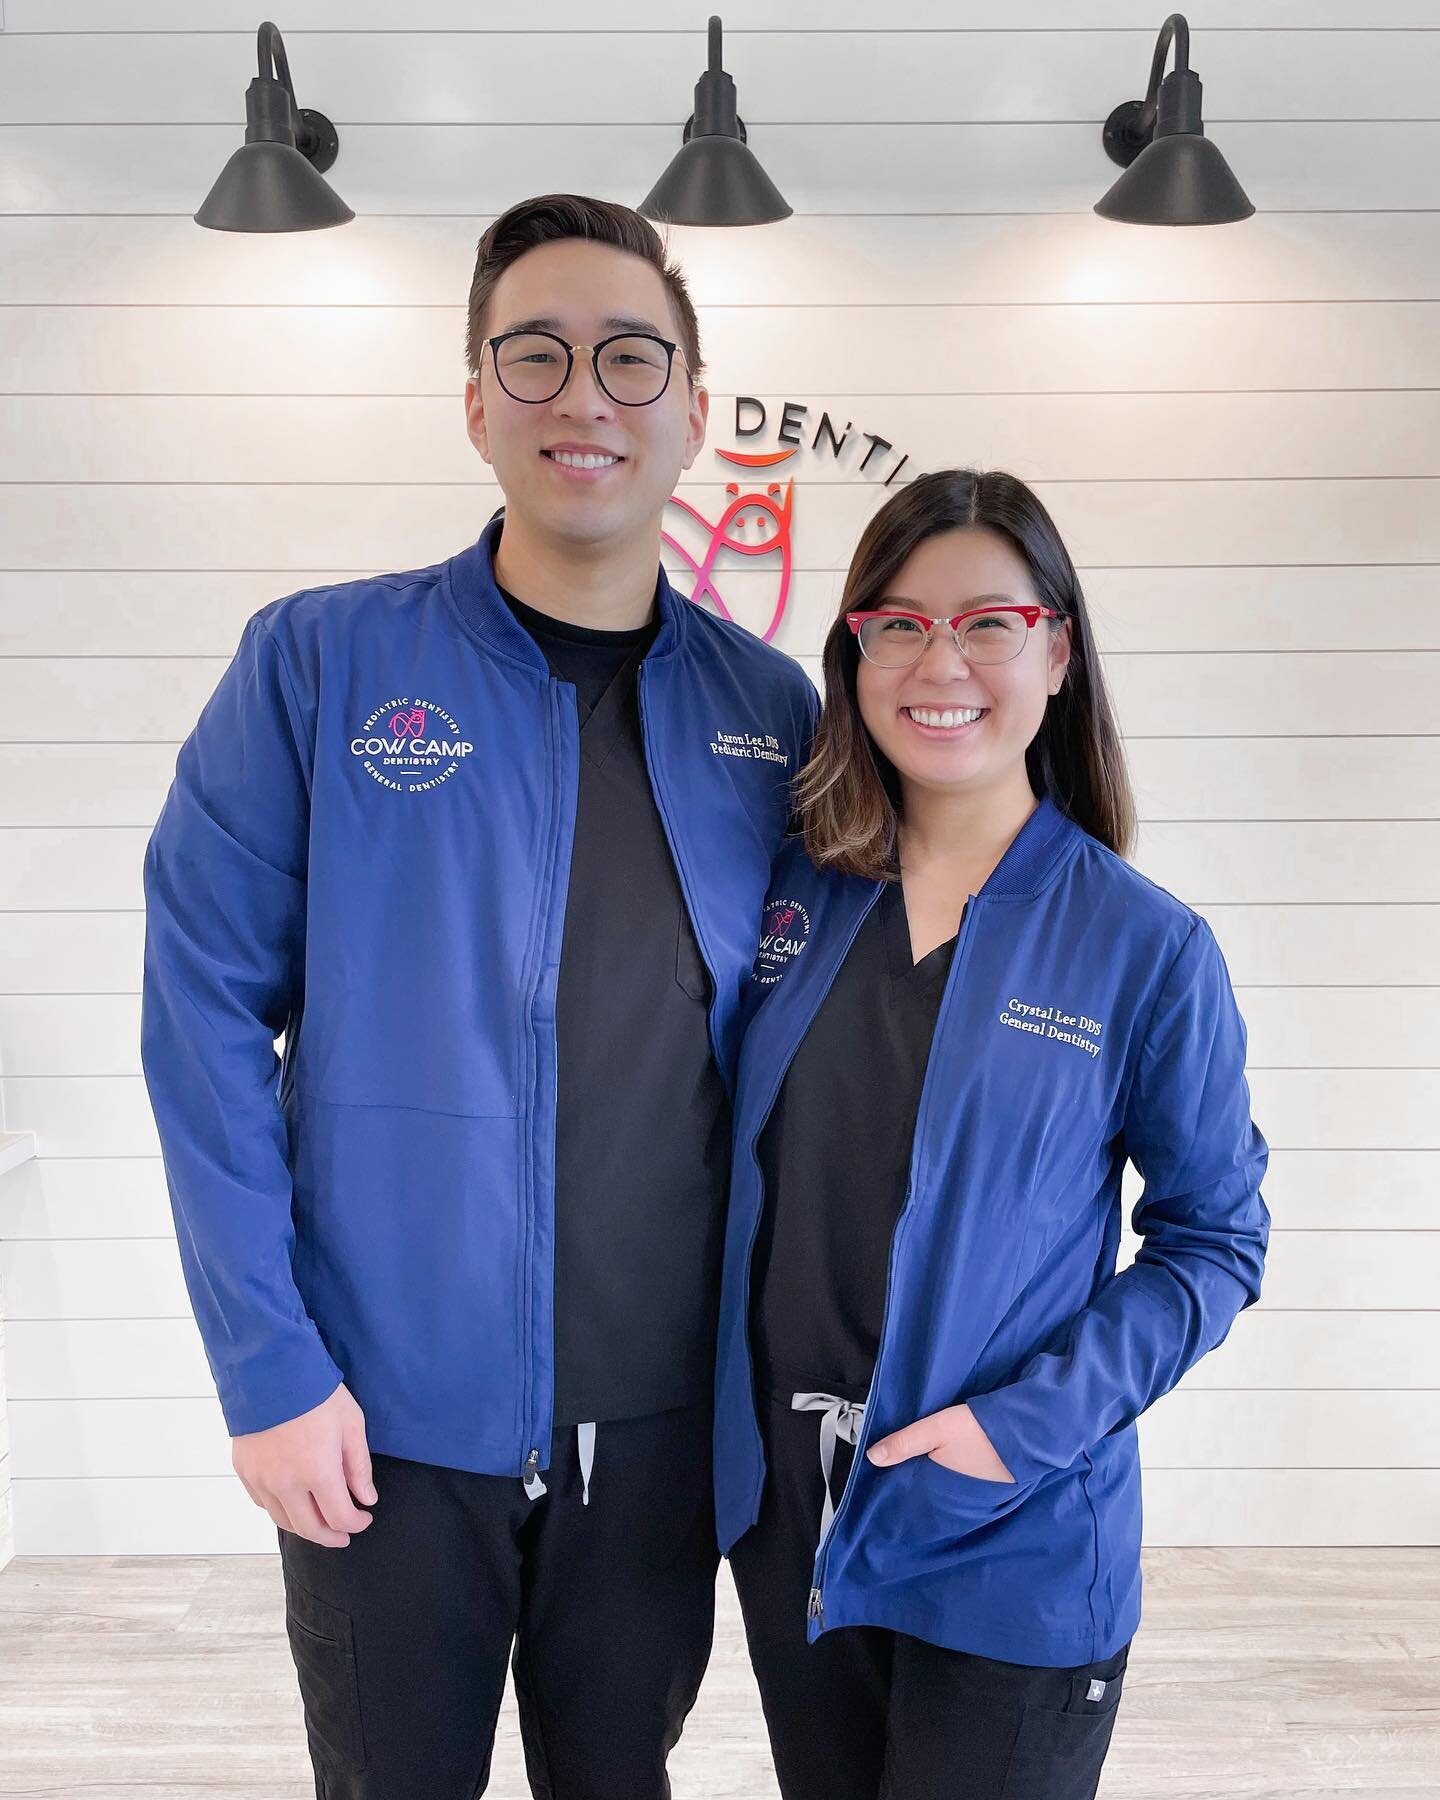 Celebrating 2 years of being open at Cow Camp Dentistry 🤍

When we opened our doors in 2021 at the peak of the pandemic, we honestly didn&rsquo;t know what to expect in such turbulent times. 
Fast forward to now, we are so full of gratitude. For the